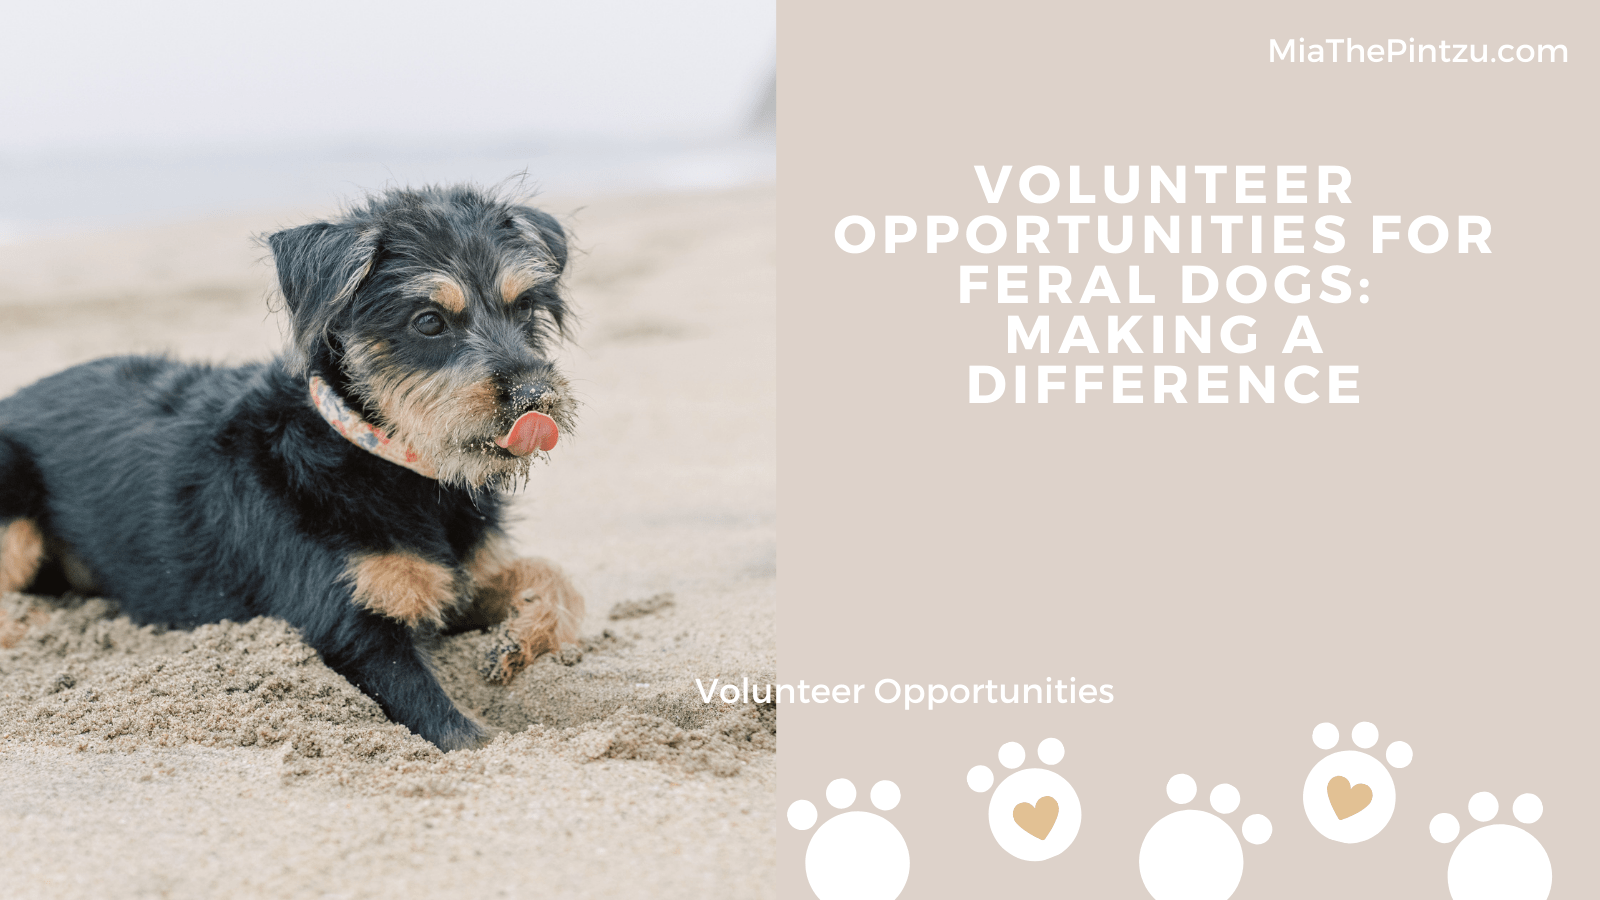 Volunteer Opportunities for Feral Dogs: Making a Difference